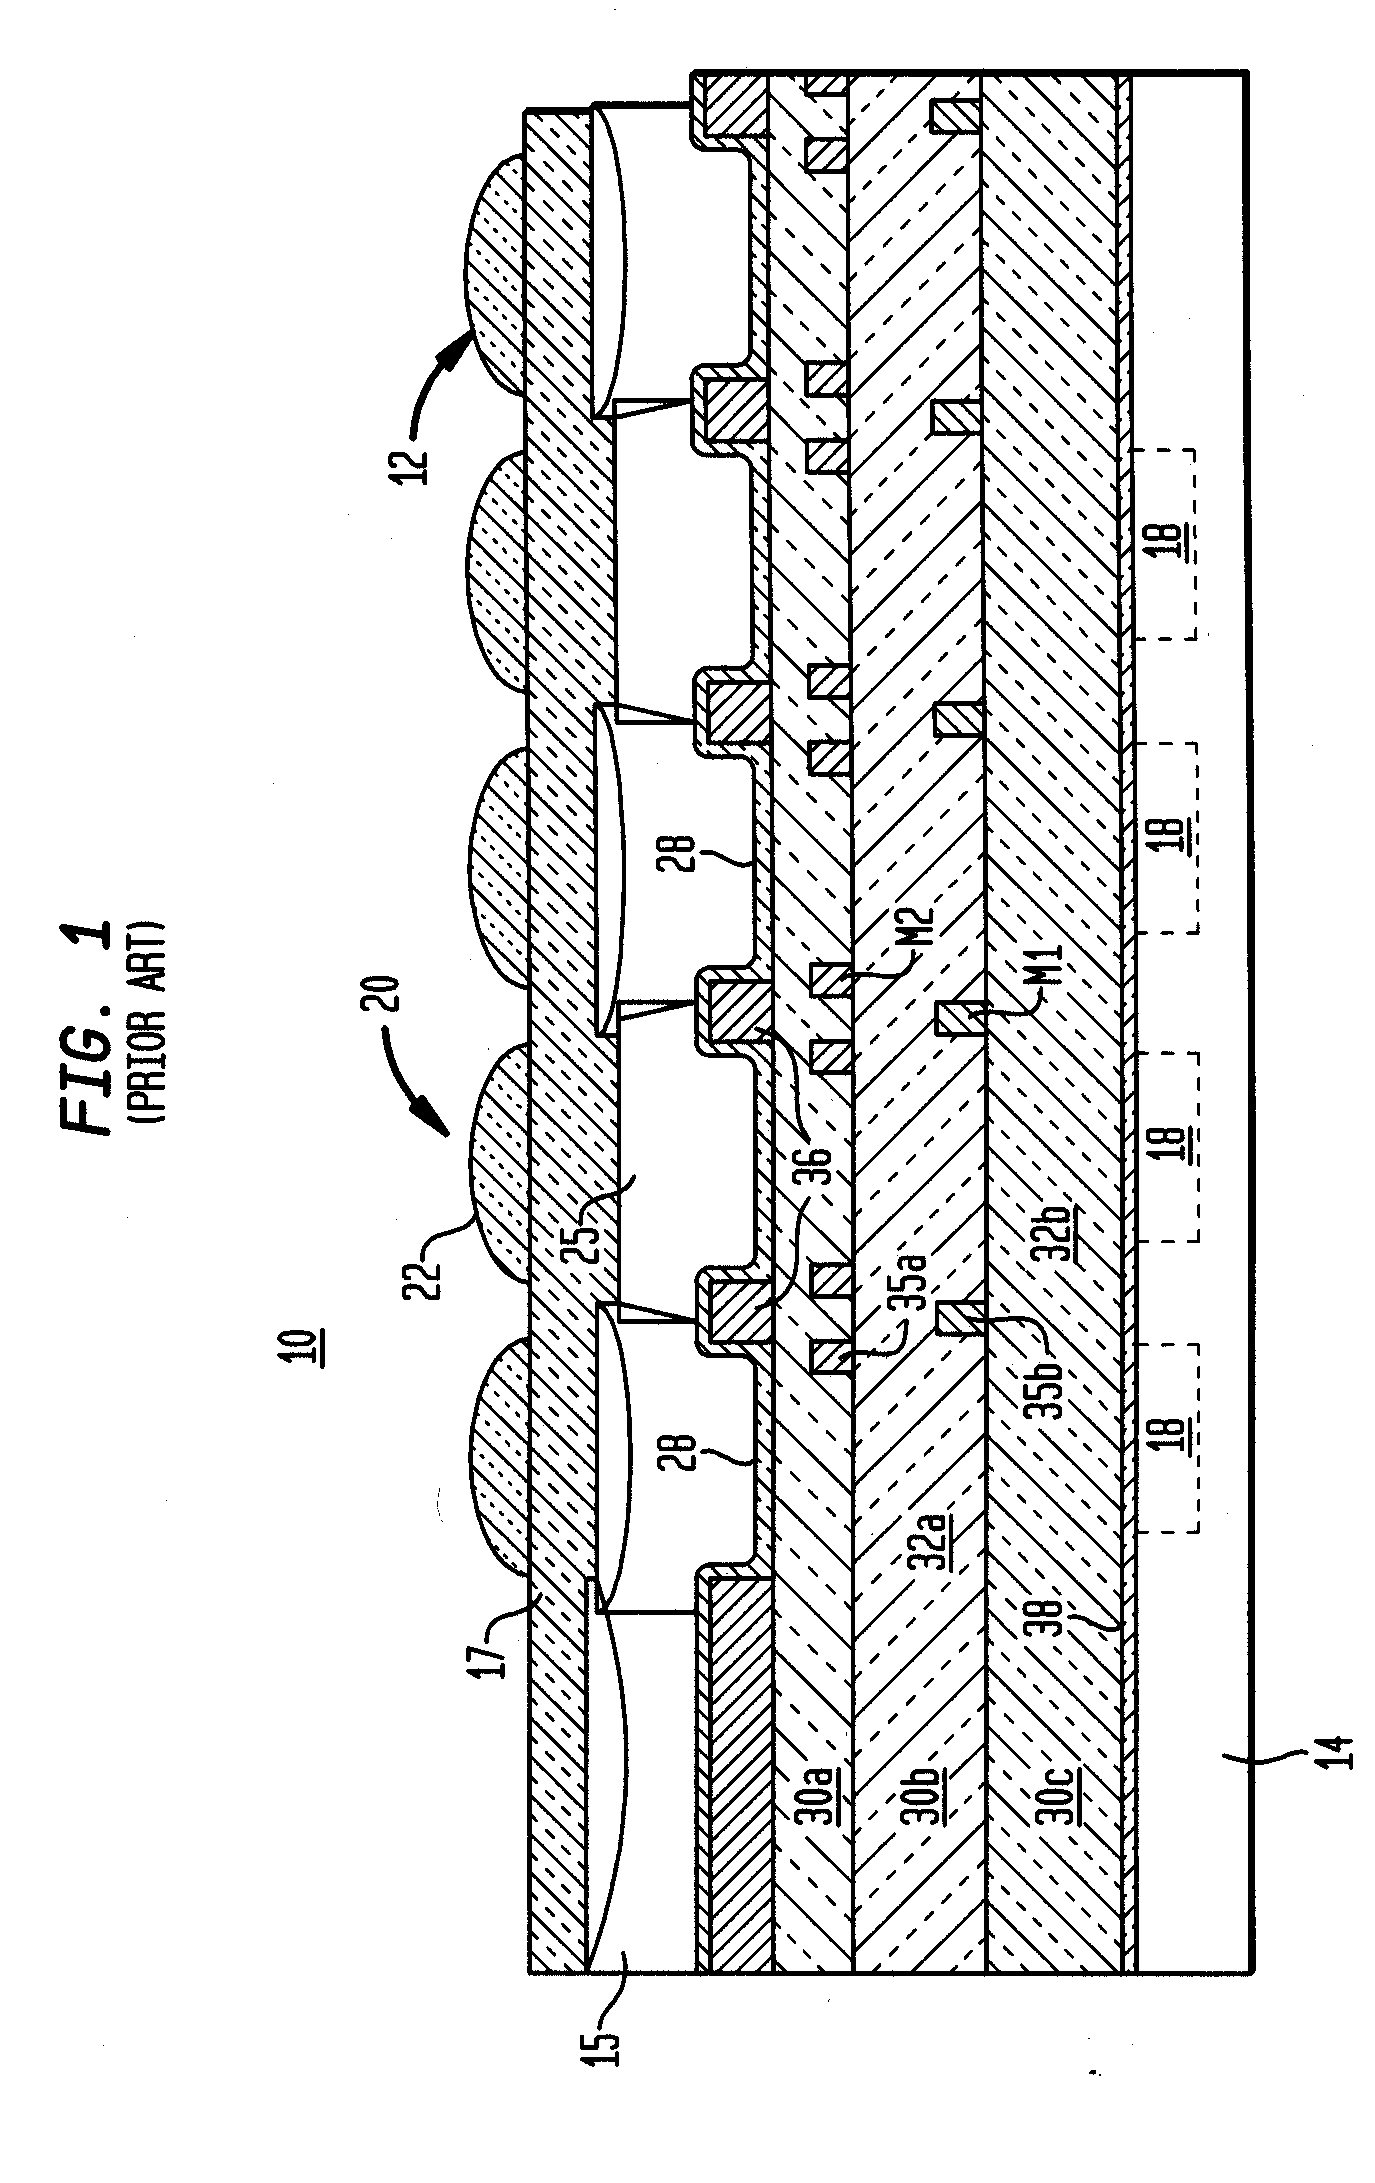 A CMOS imager with cu wiring and method of eliminating high reflectivity interfaces therefrom